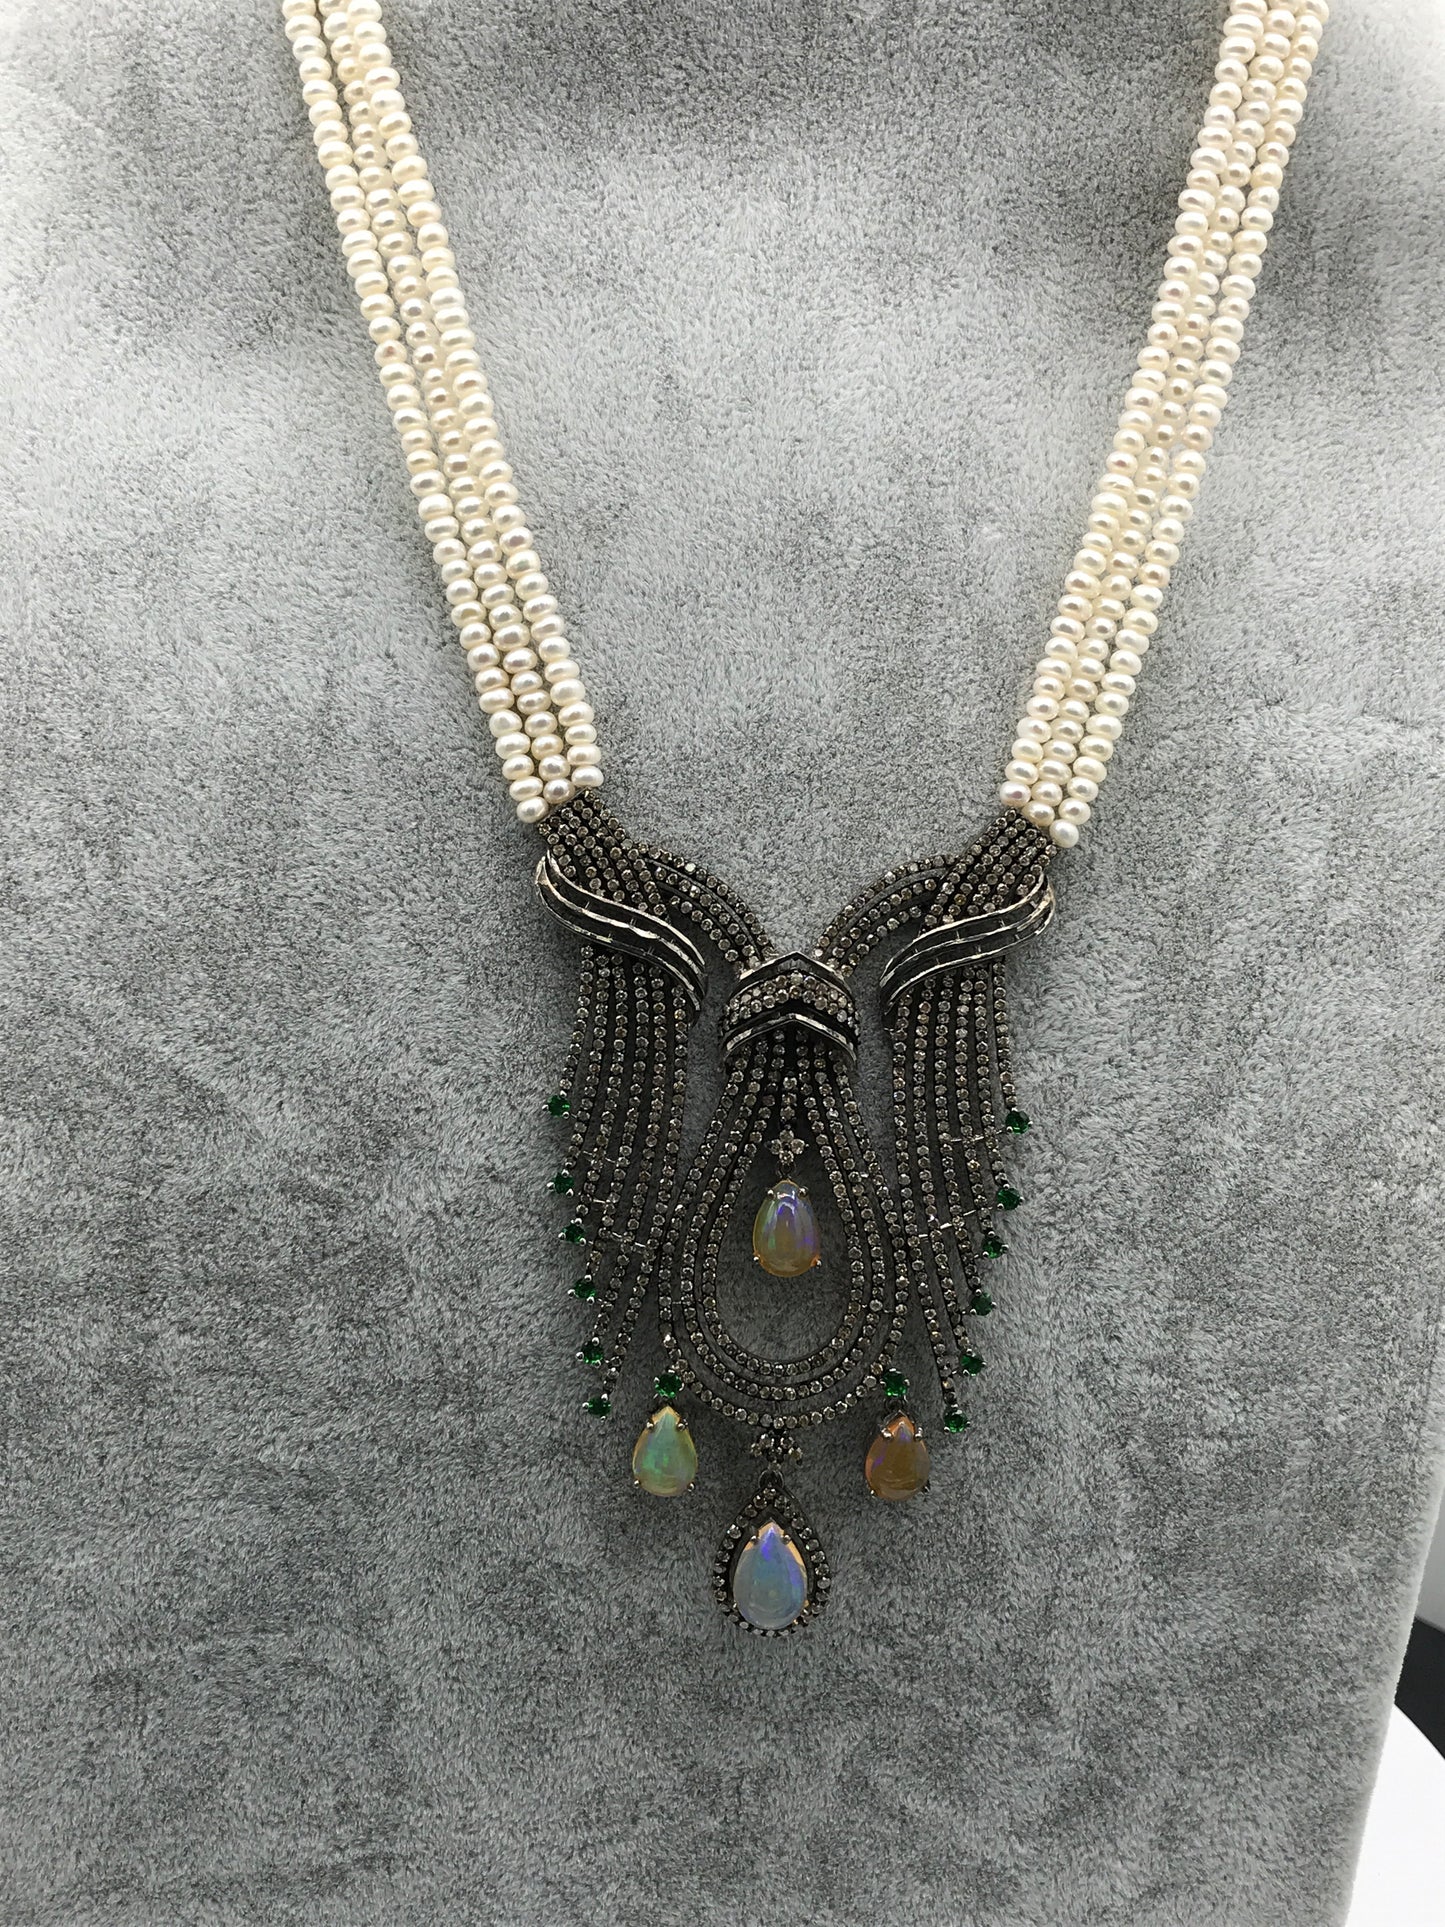 Designer Opal and Diamond Pendant Necklace with Pearls